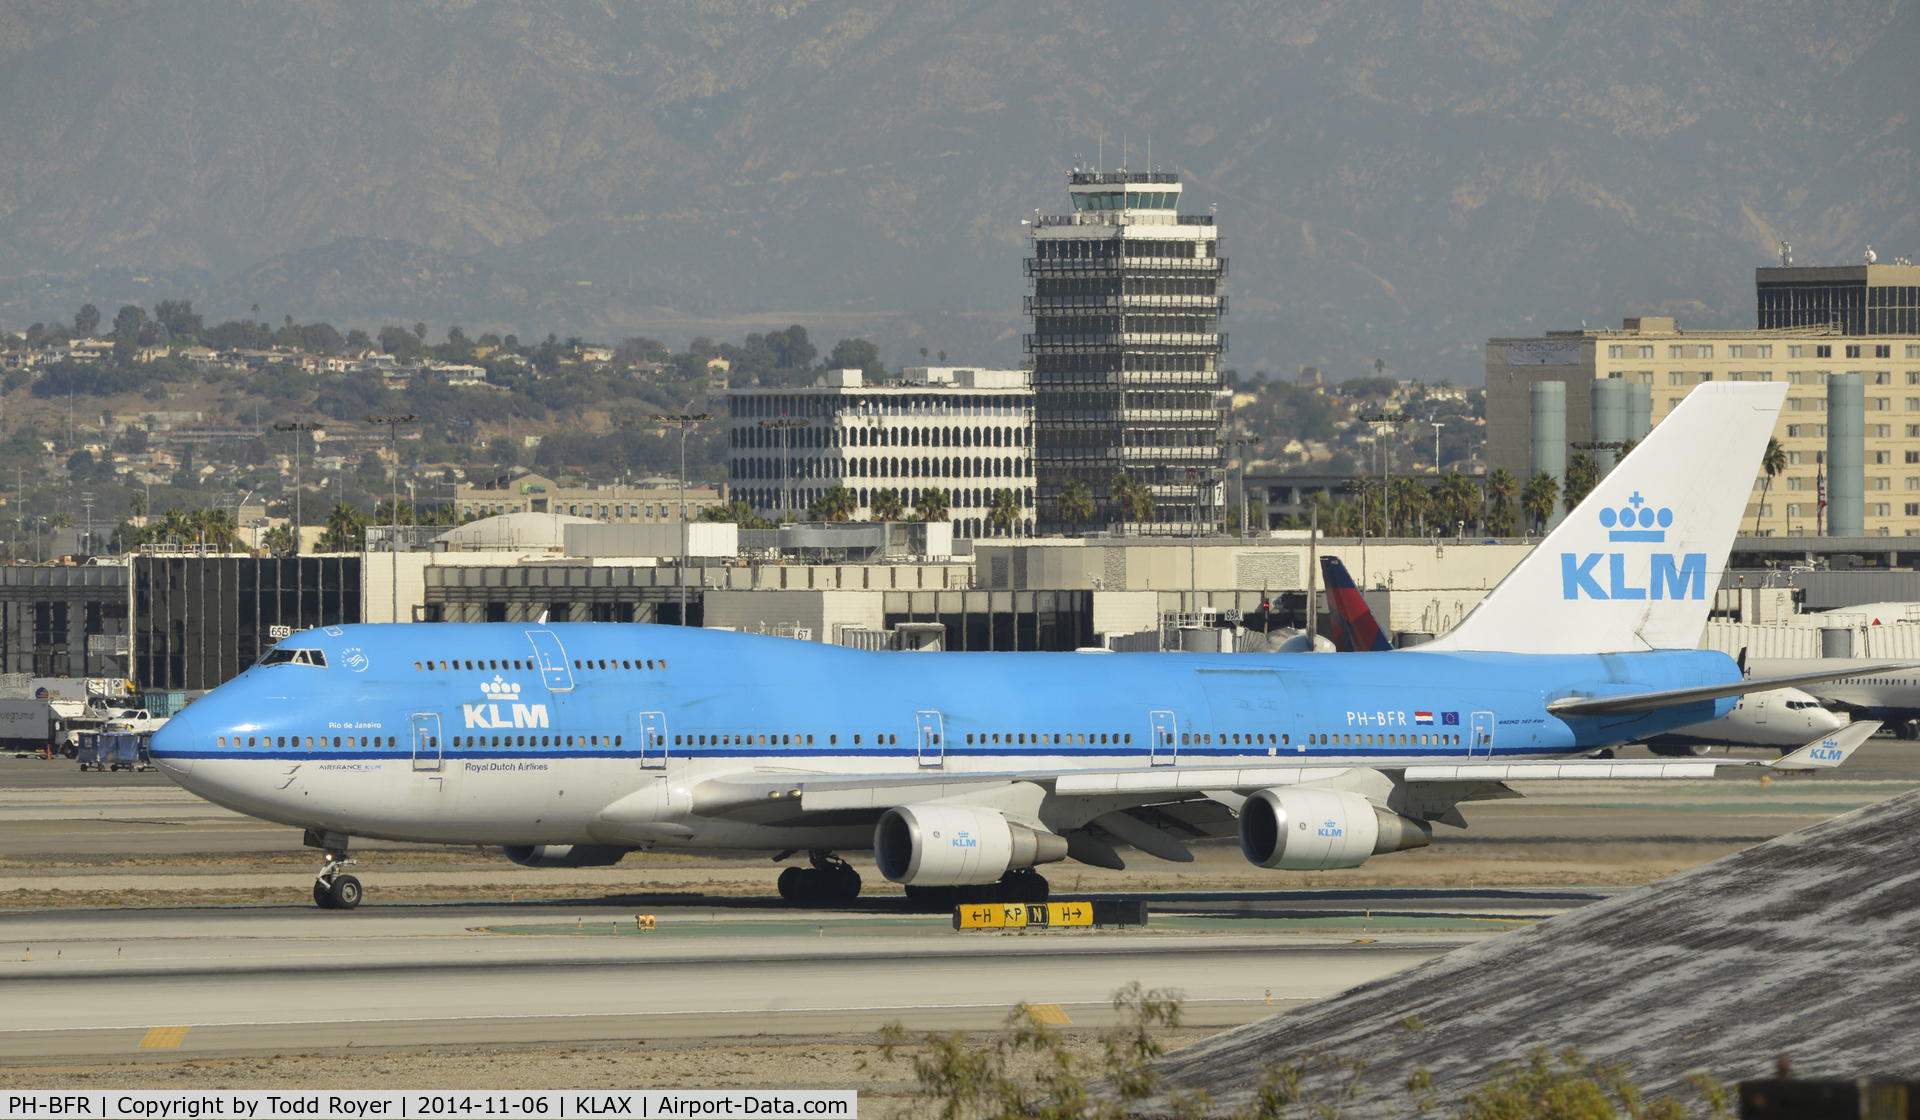 PH-BFR, 1994 Boeing 747-406BC C/N 27202, Taxiing to gate after landing on 25L at LAX